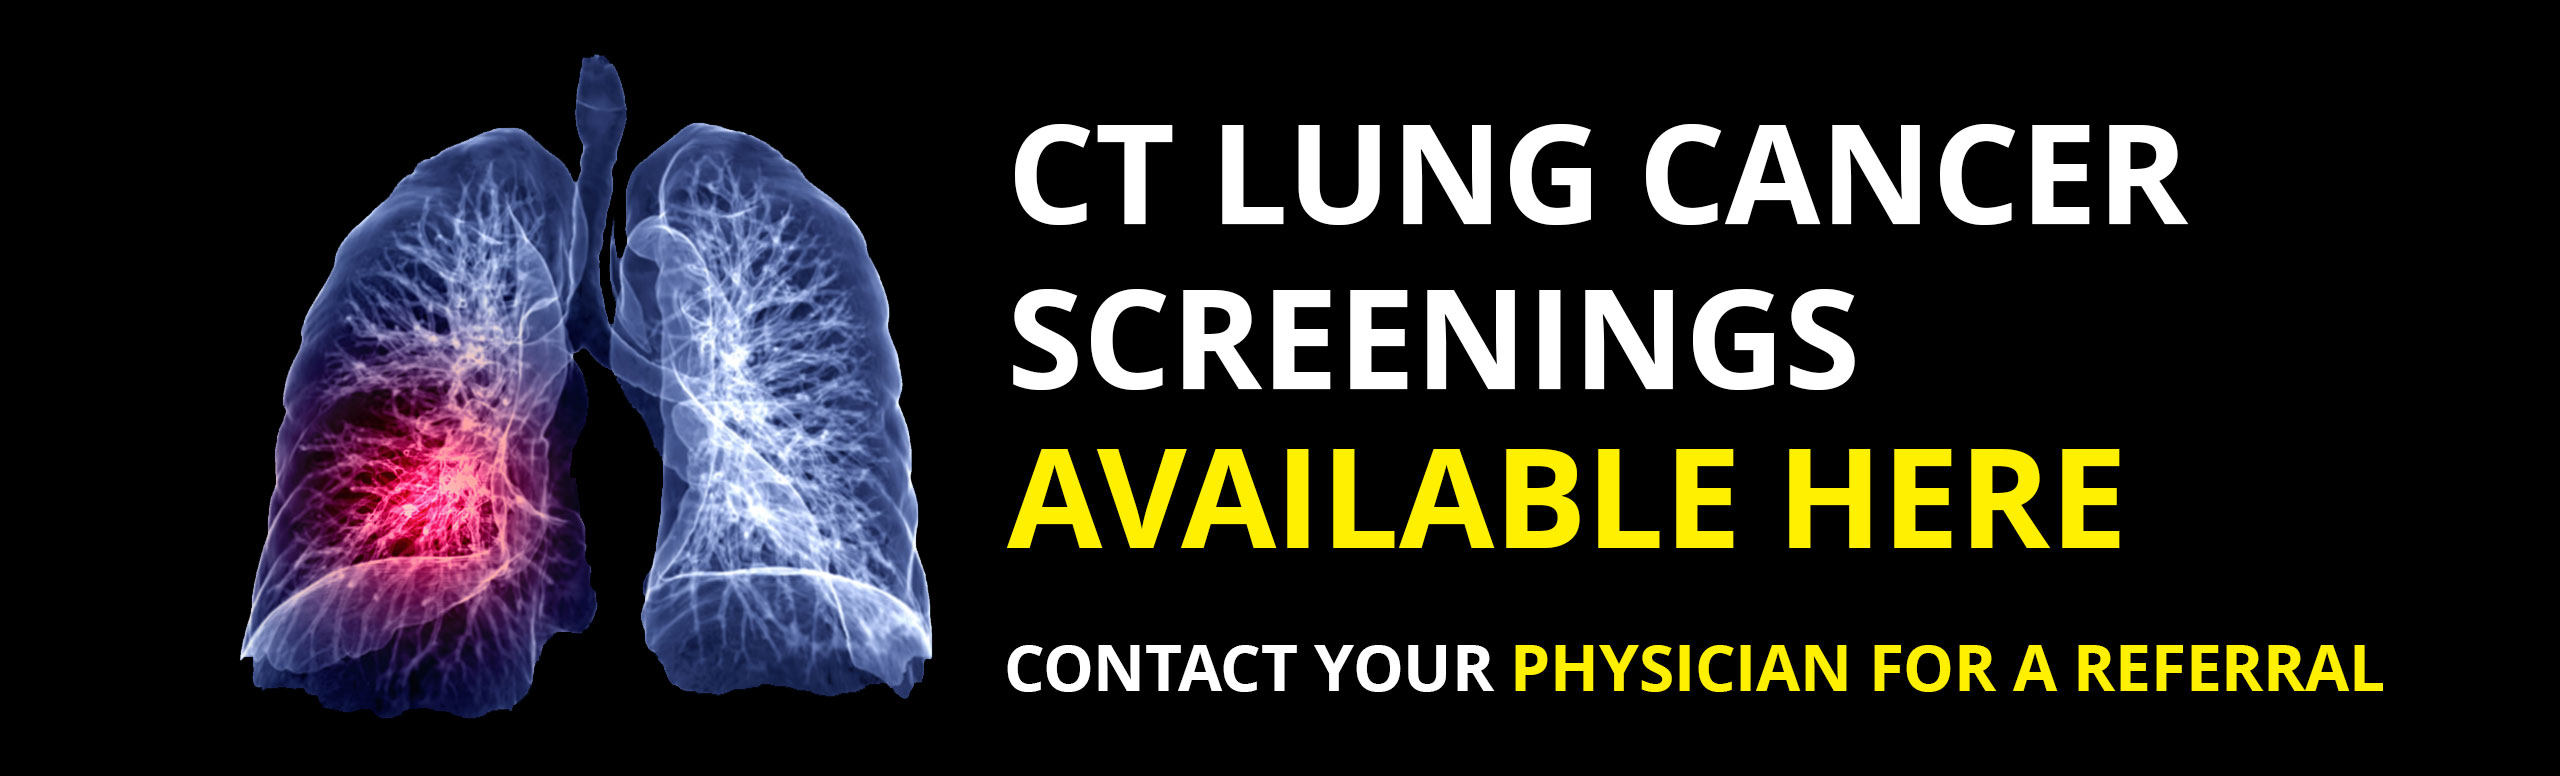 CT LUNG CANCER SCREENINGS Available here

Contact your physician for a referral